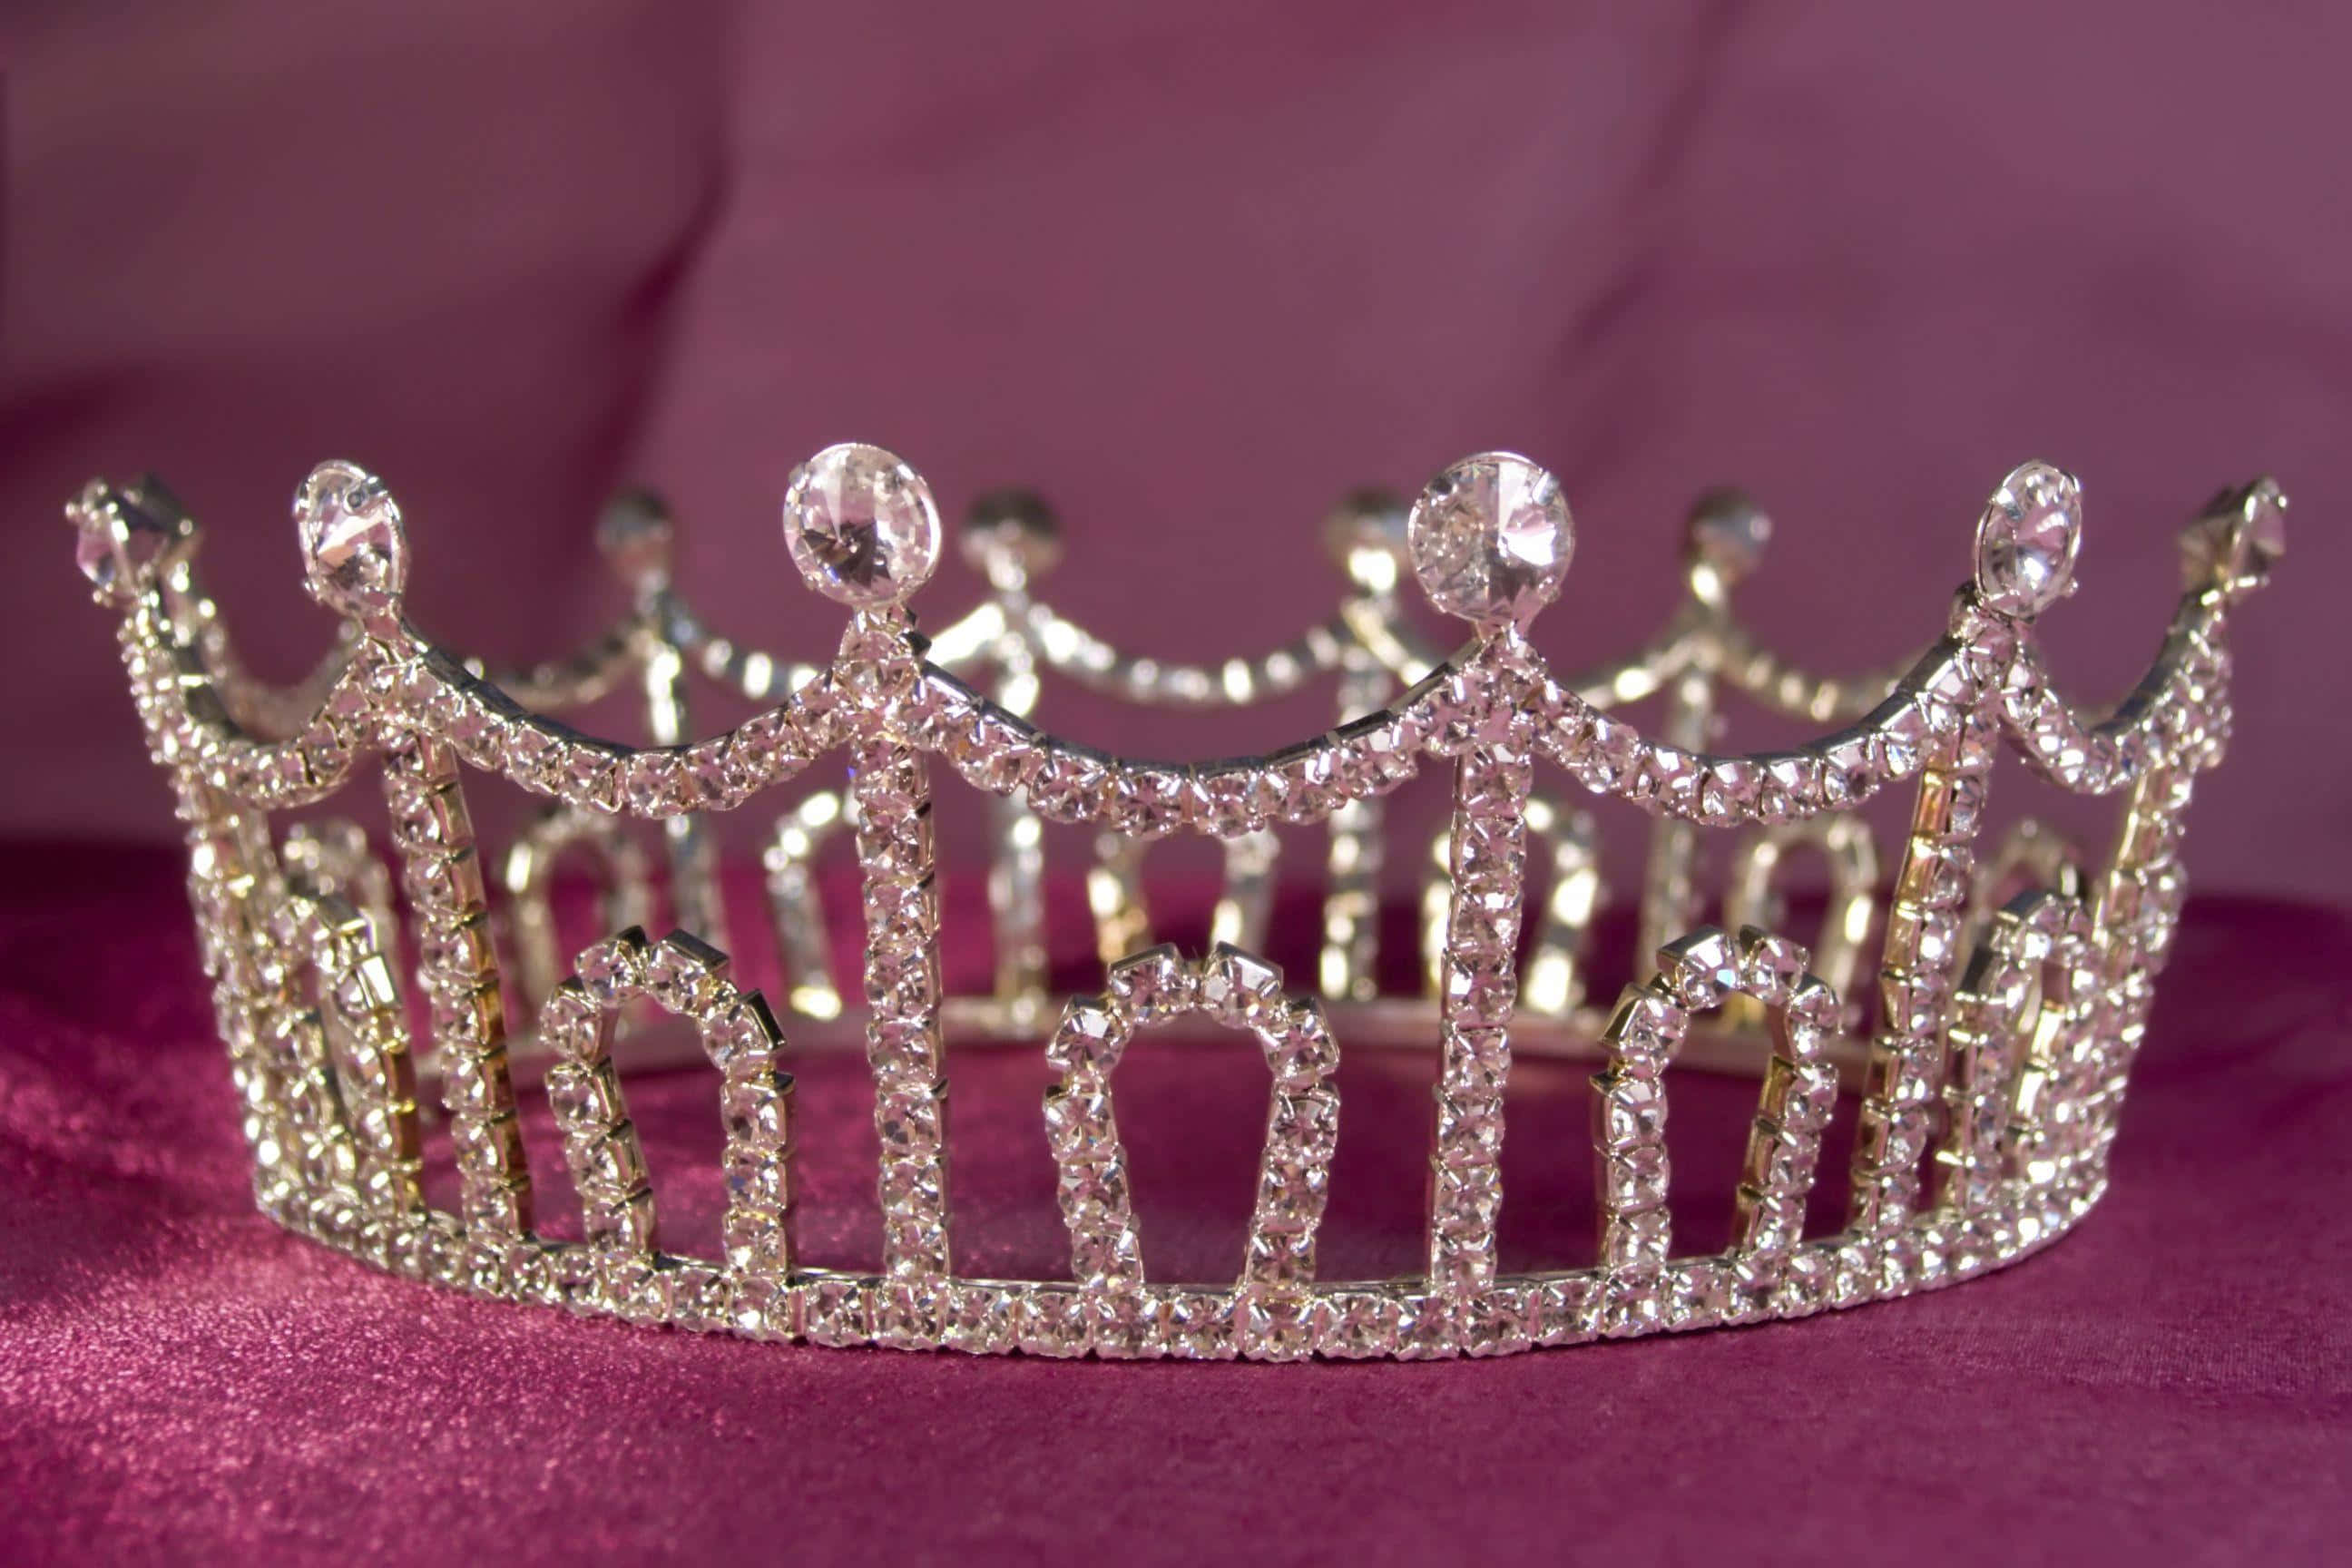 A Shiny Gold Crown on a Dark Background